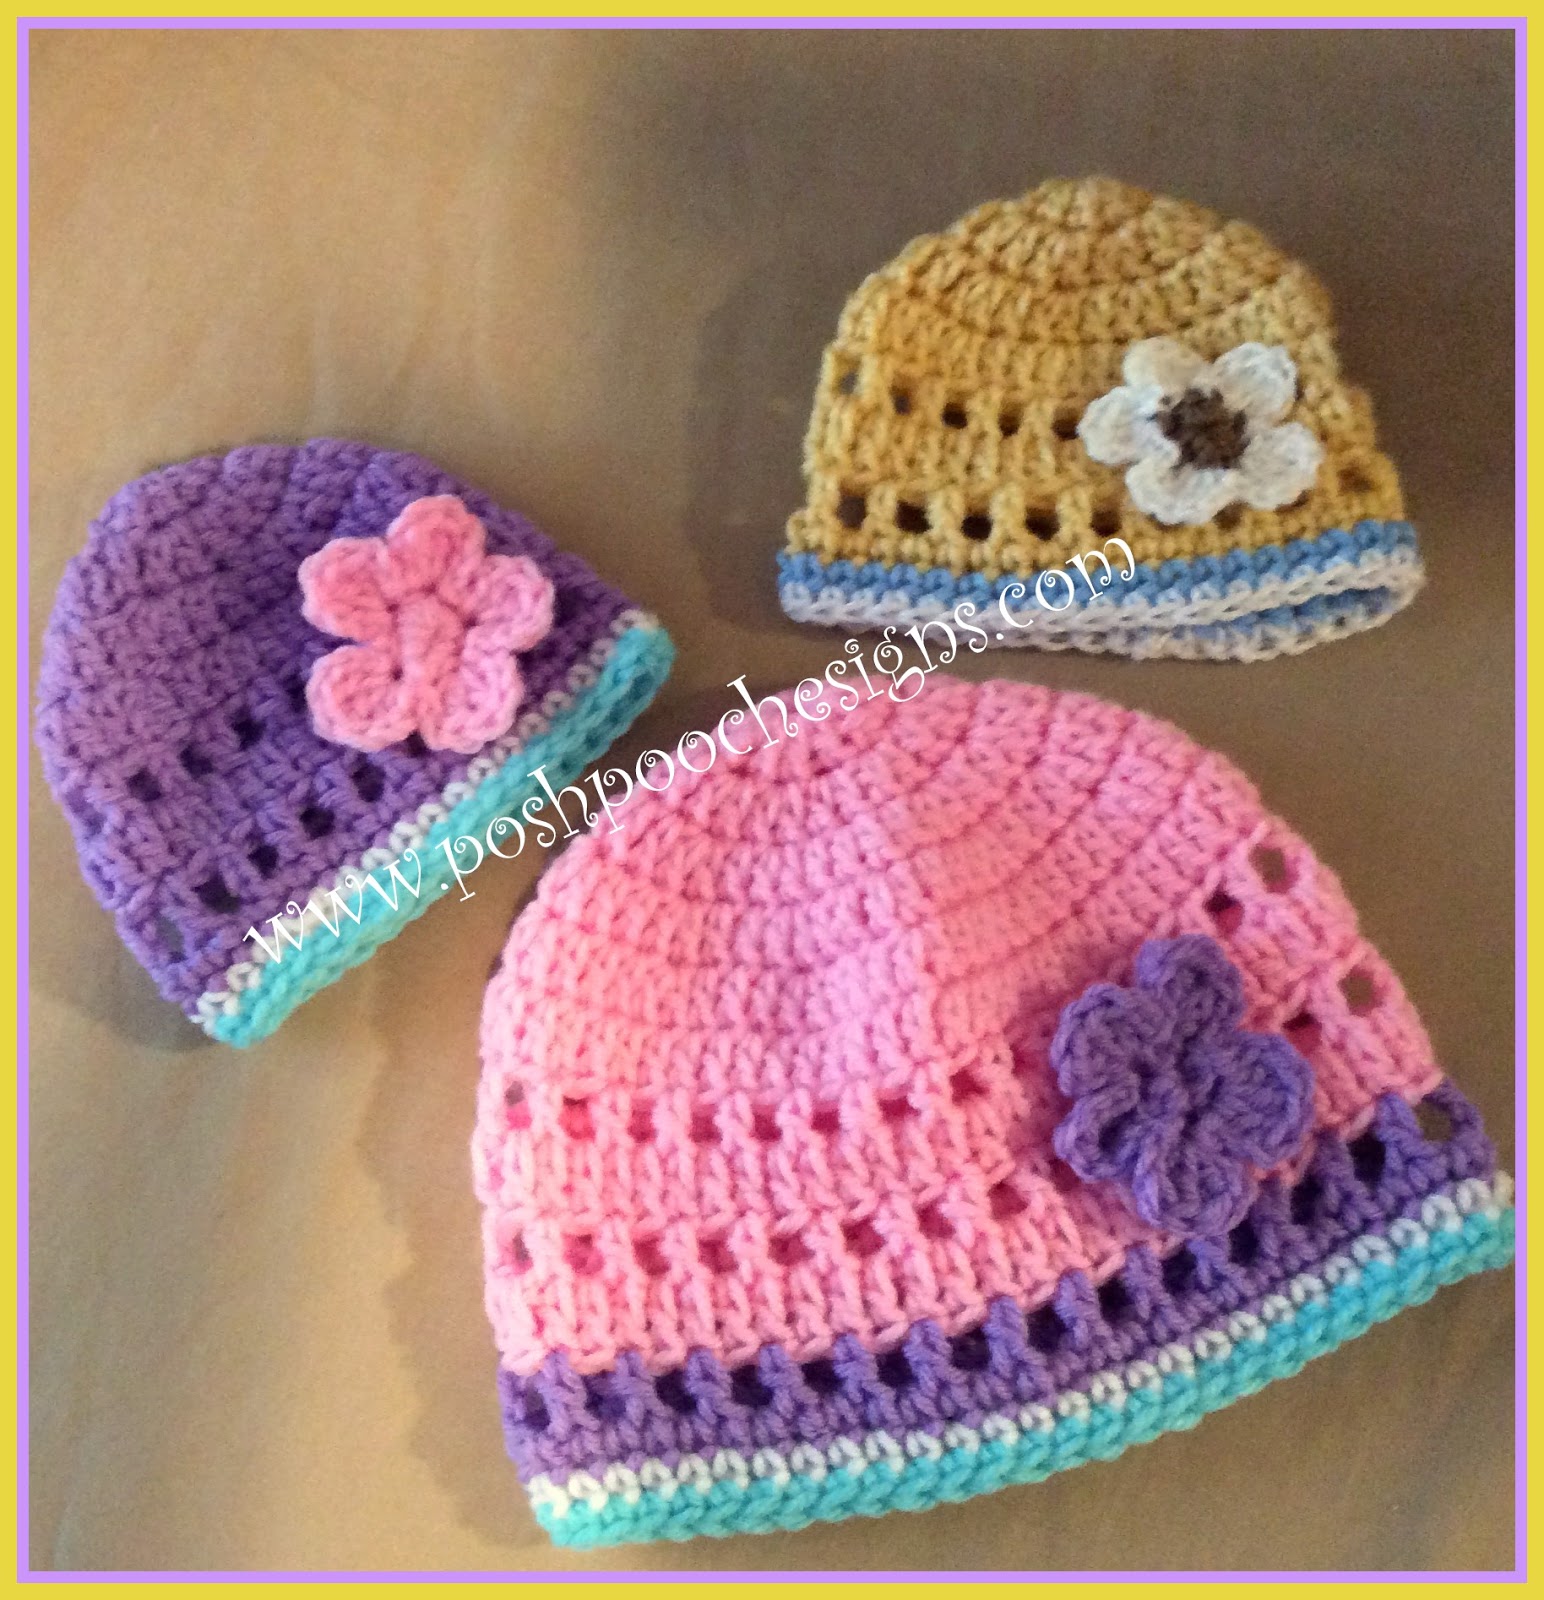 Posh Pooch Designs : Dolly and Me Spring Beanies Crochet Pattern | Posh ...